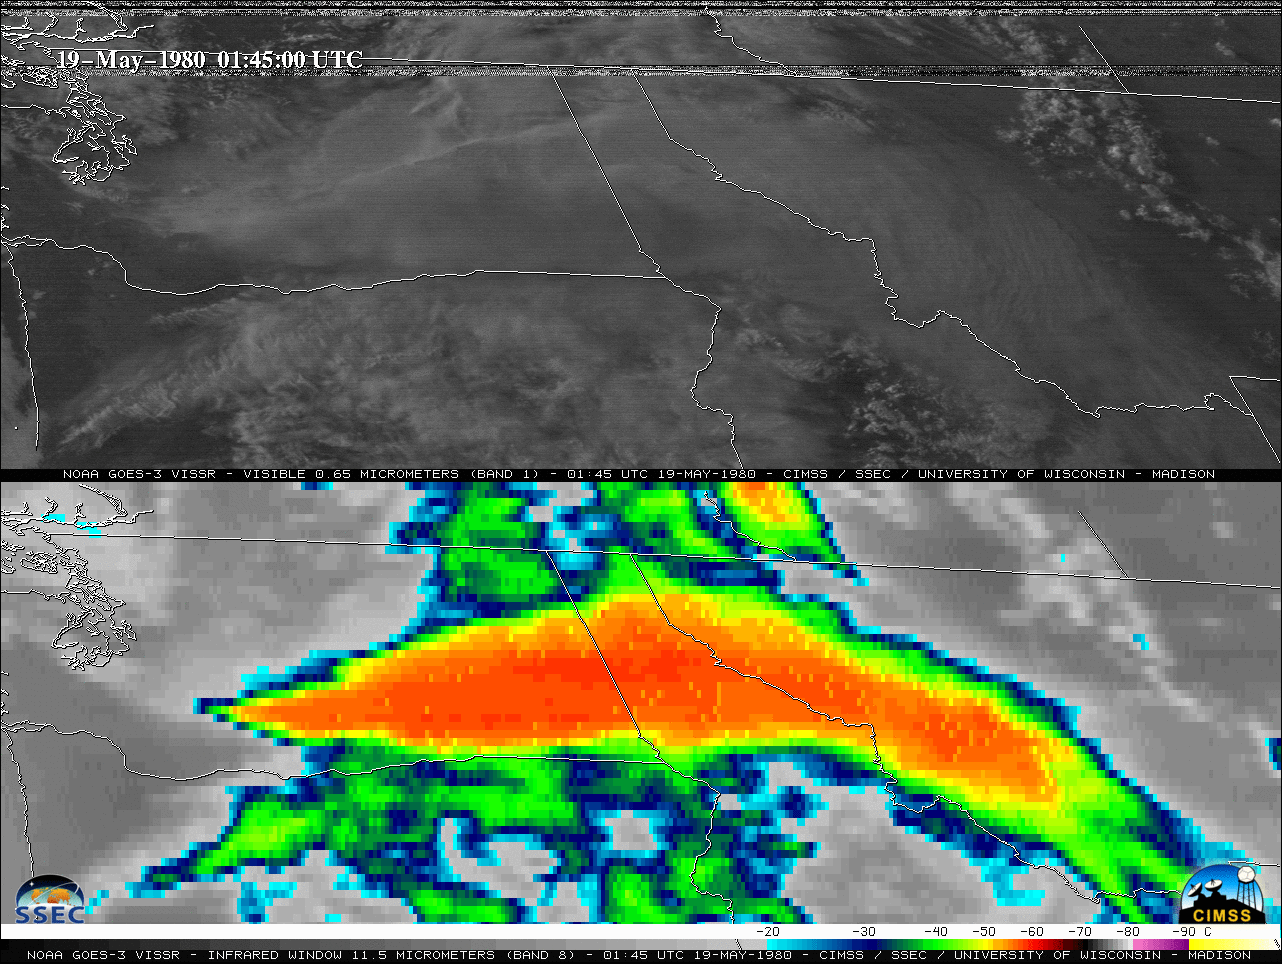 GOES-3 0.65 µm Visible (top) and 10.7 µm Infrared Window (bottom) images [click to play animation]